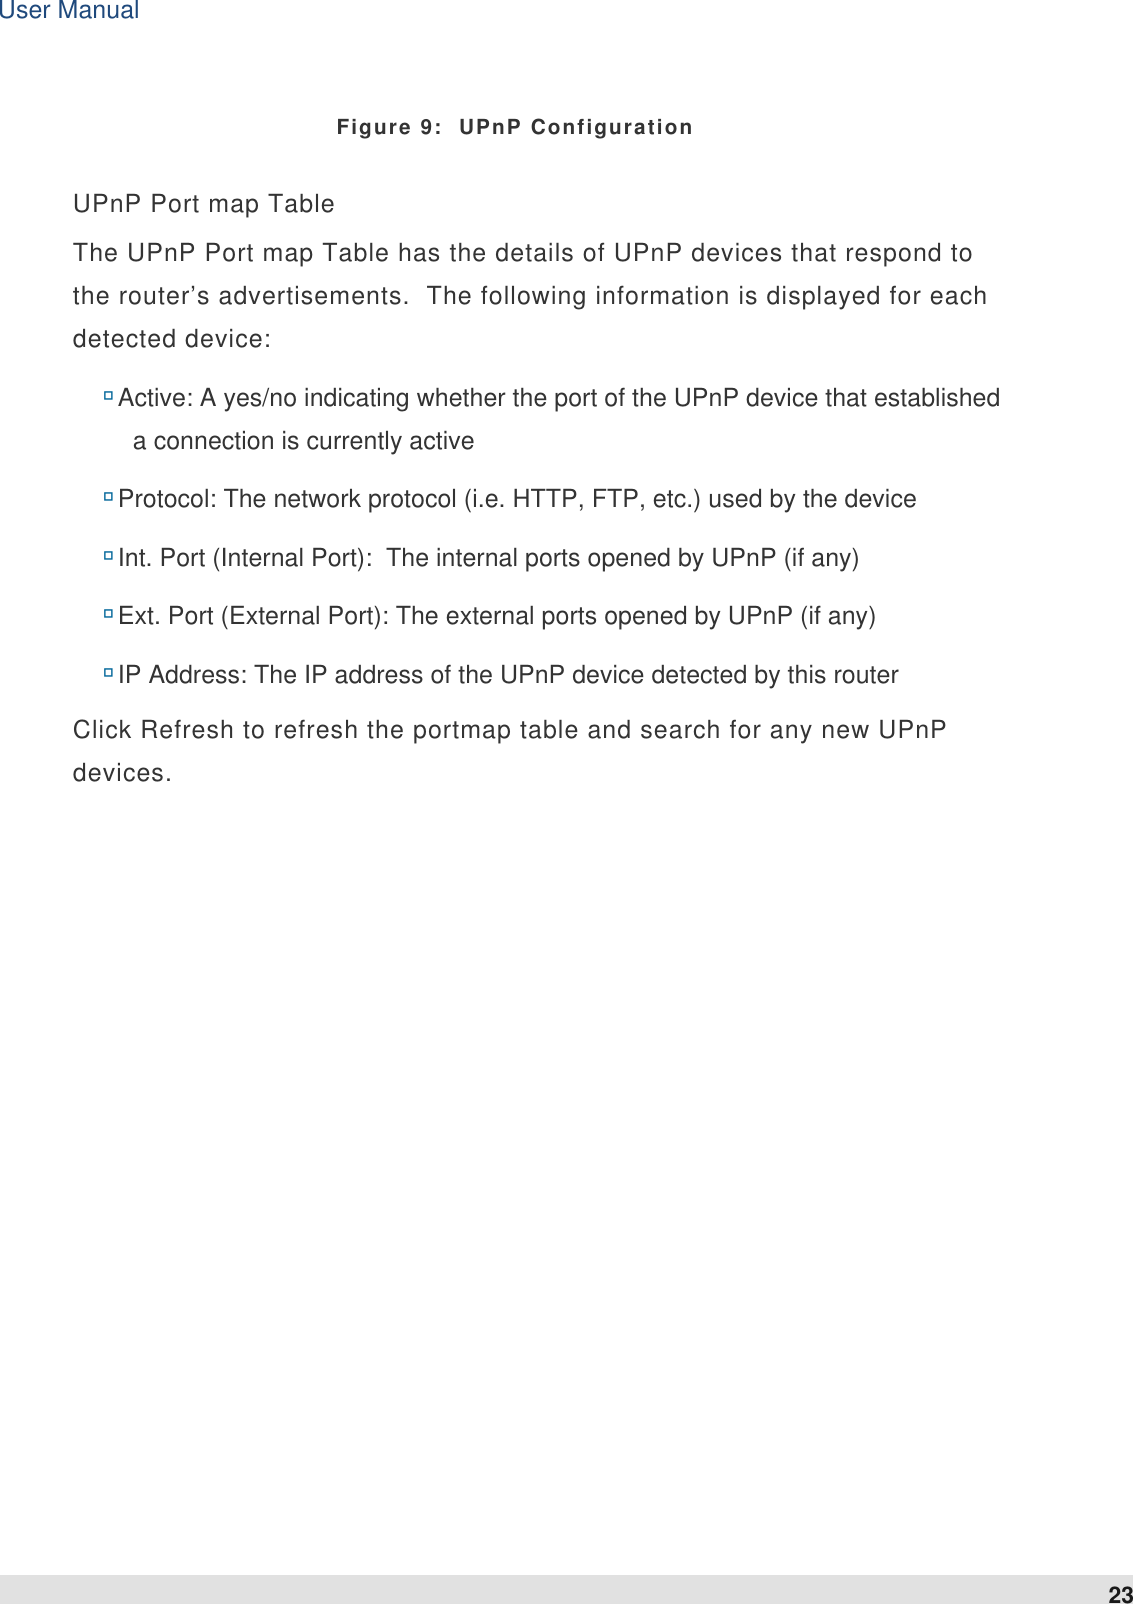 User Manual 23   Figure 9:  UPnP Configuration UPnP Port map Table  The UPnP Port map Table has the details of UPnP devices that respond to the router’s advertisements.  The following information is displayed for each detected device:  Active: A yes/no indicating whether the port of the UPnP device that established a connection is currently active  Protocol: The network protocol (i.e. HTTP, FTP, etc.) used by the device  Int. Port (Internal Port):  The internal ports opened by UPnP (if any)  Ext. Port (External Port): The external ports opened by UPnP (if any)  IP Address: The IP address of the UPnP device detected by this router Click Refresh to refresh the portmap table and search for any new UPnP devices.  